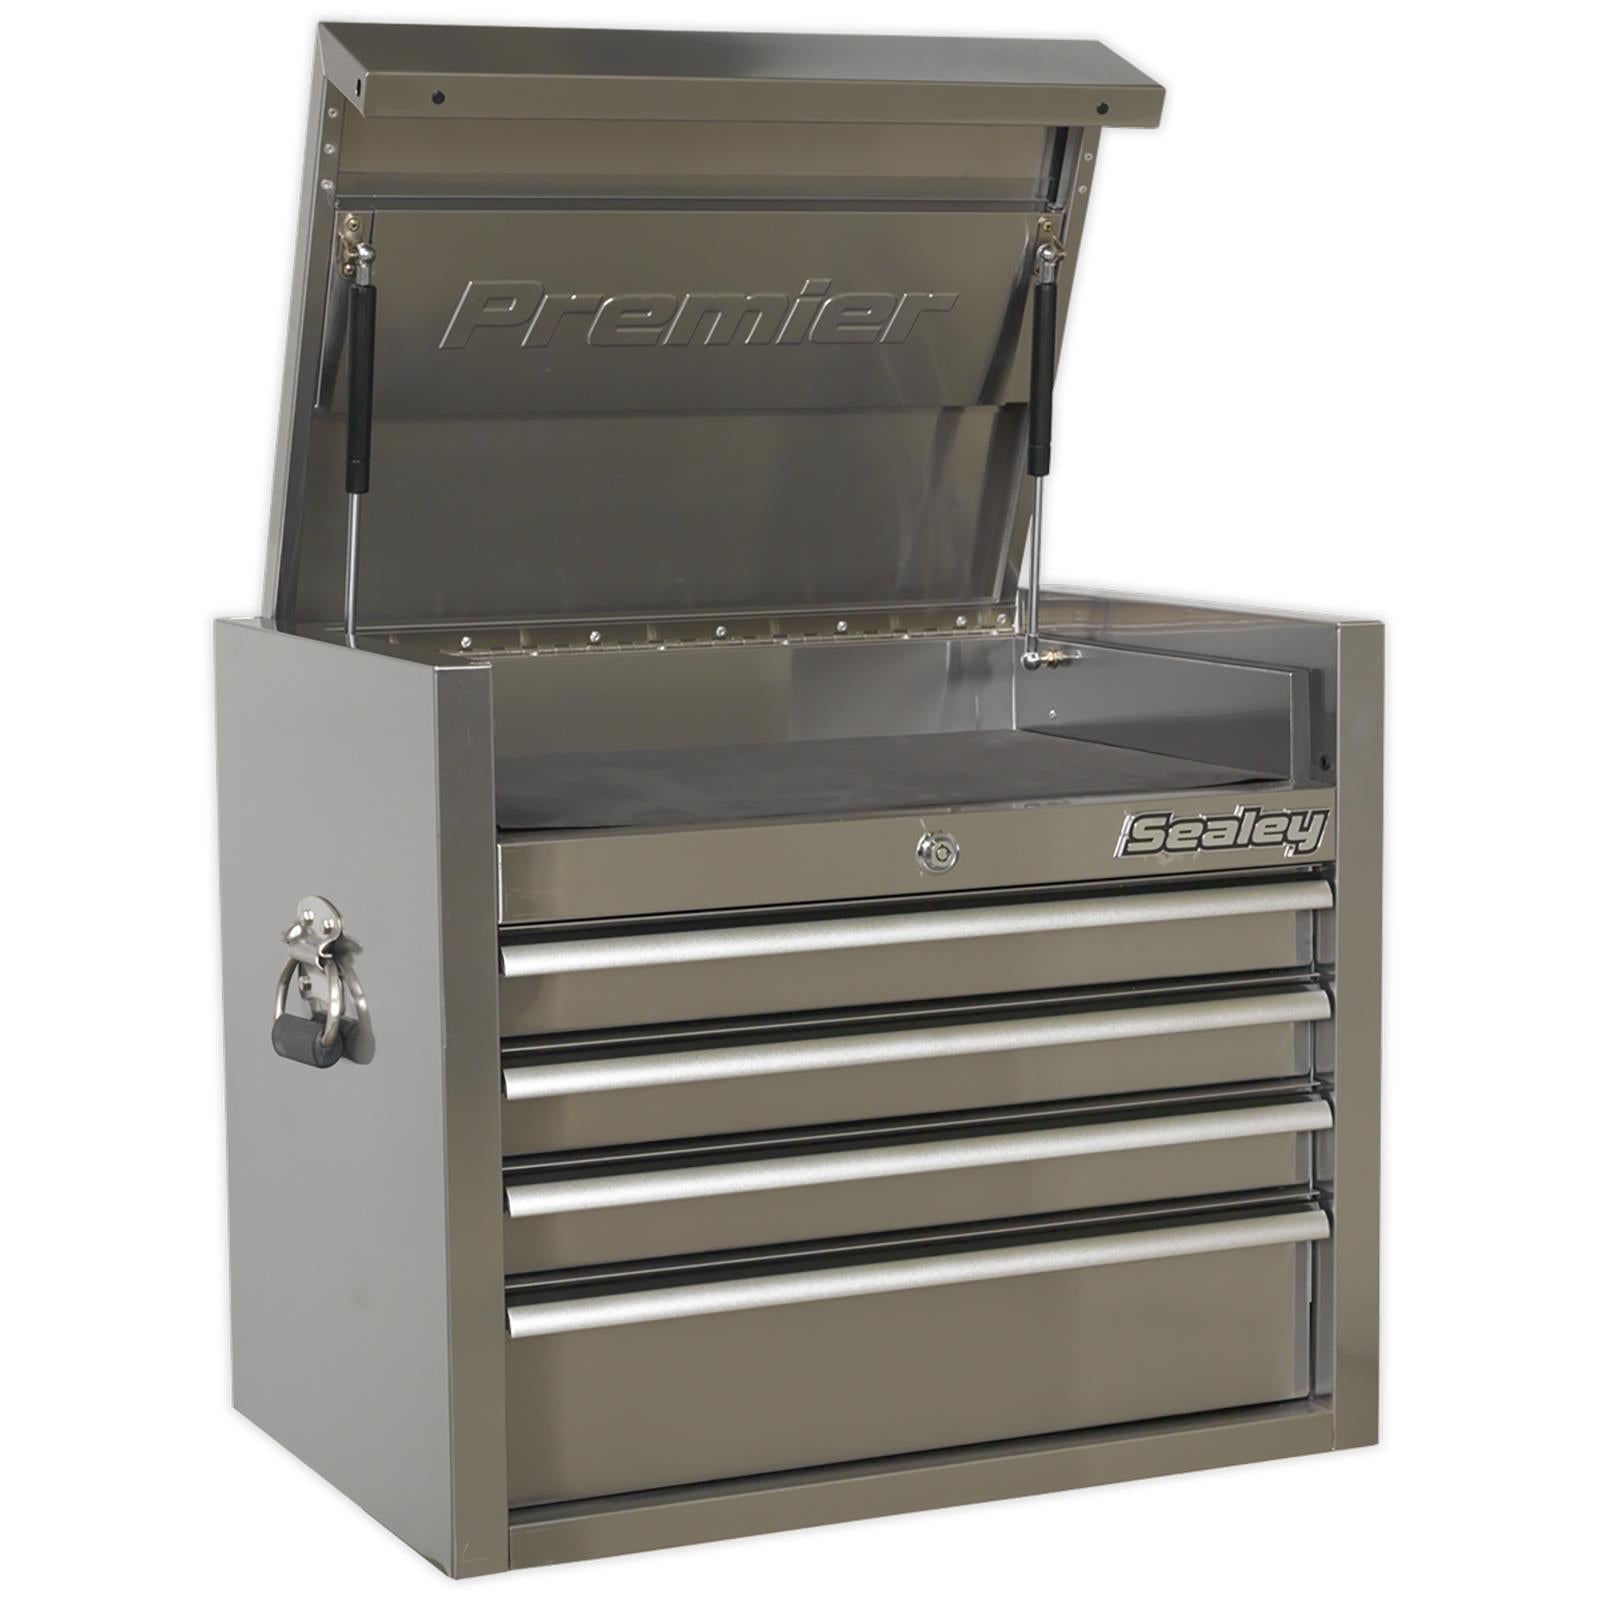 Sealey Premier Topchest 4 Drawer 675mm Stainless Steel Heavy-Duty